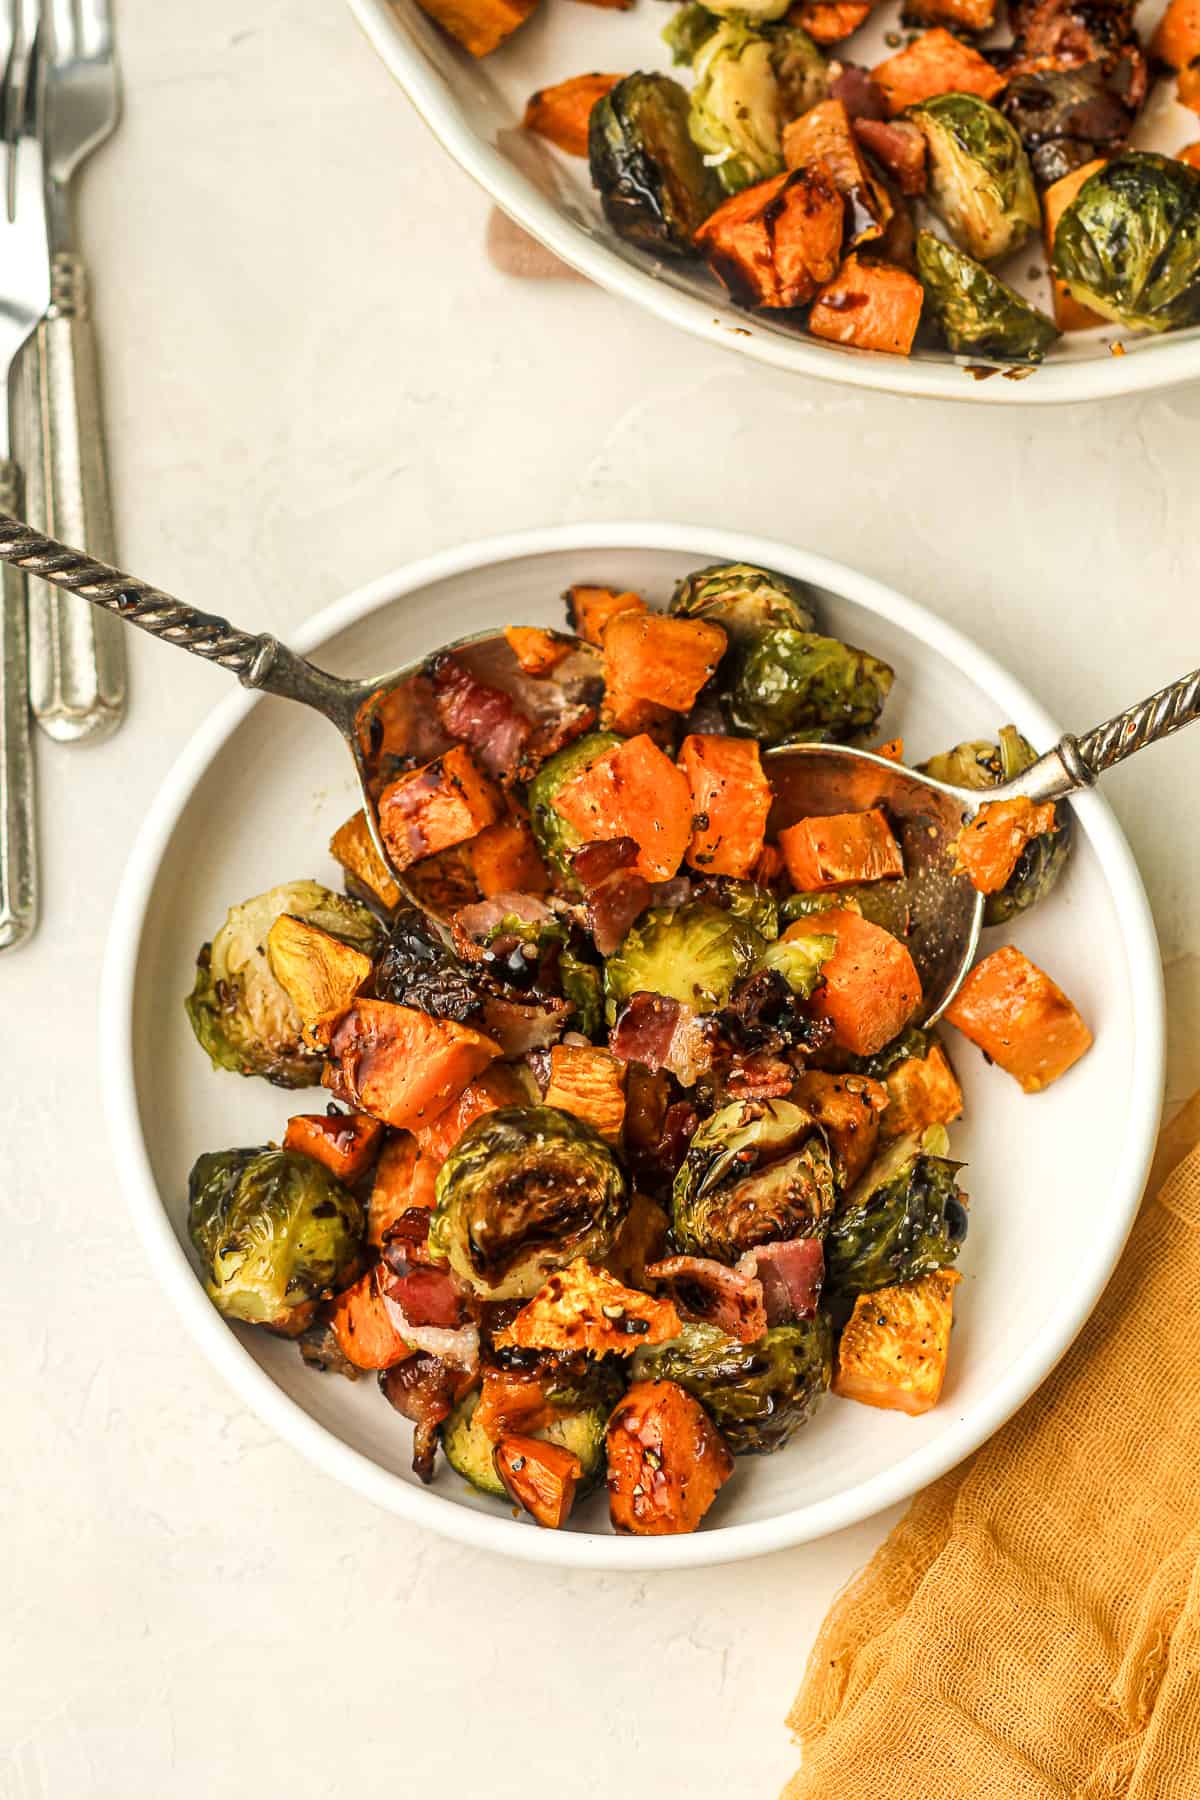 A serving of roasted brussels sprouts and sweet potatoes with bacon and balsamic glaze.